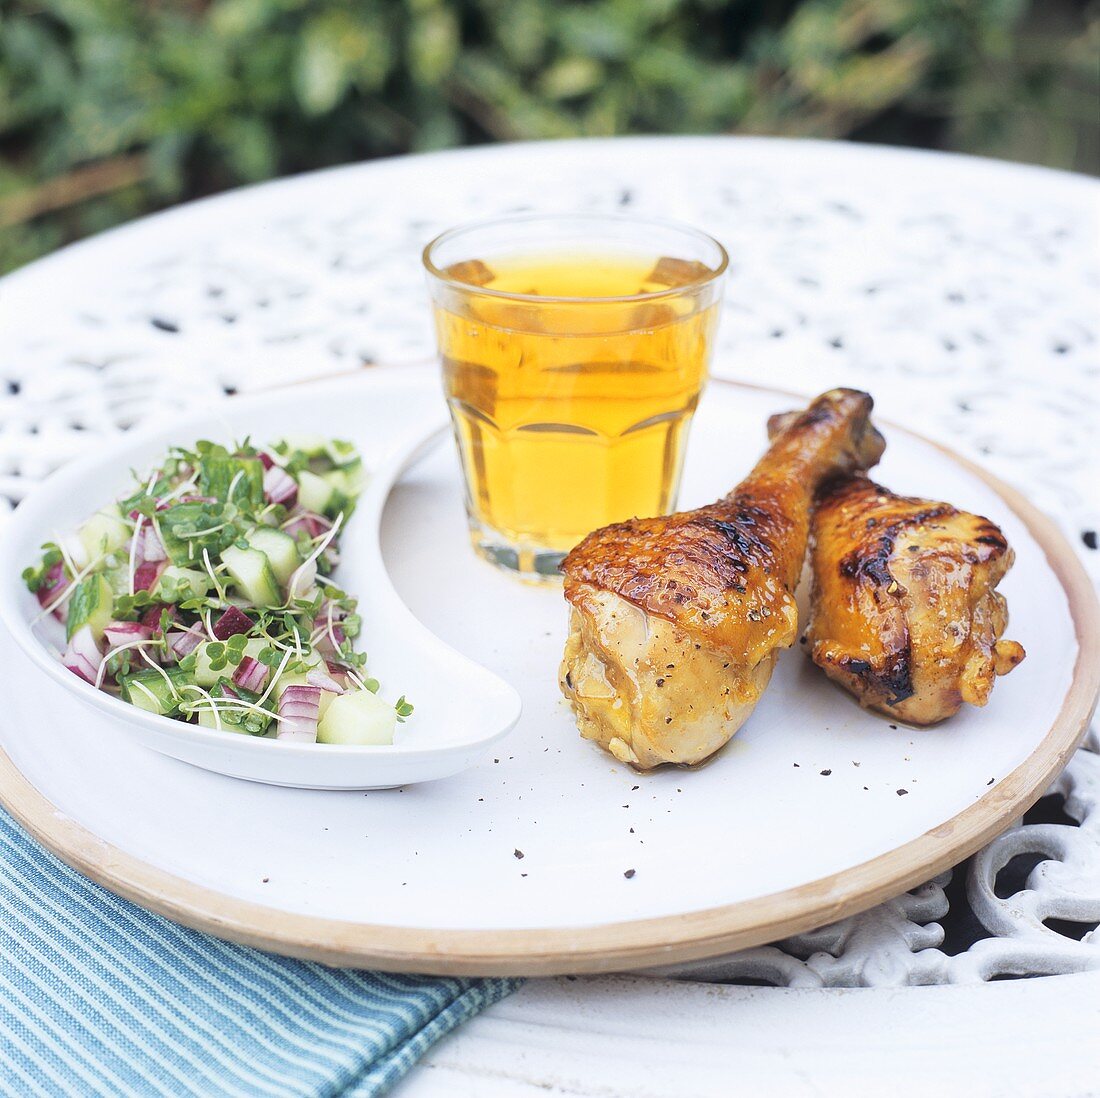 Chicken legs with cucumber salad out of doors